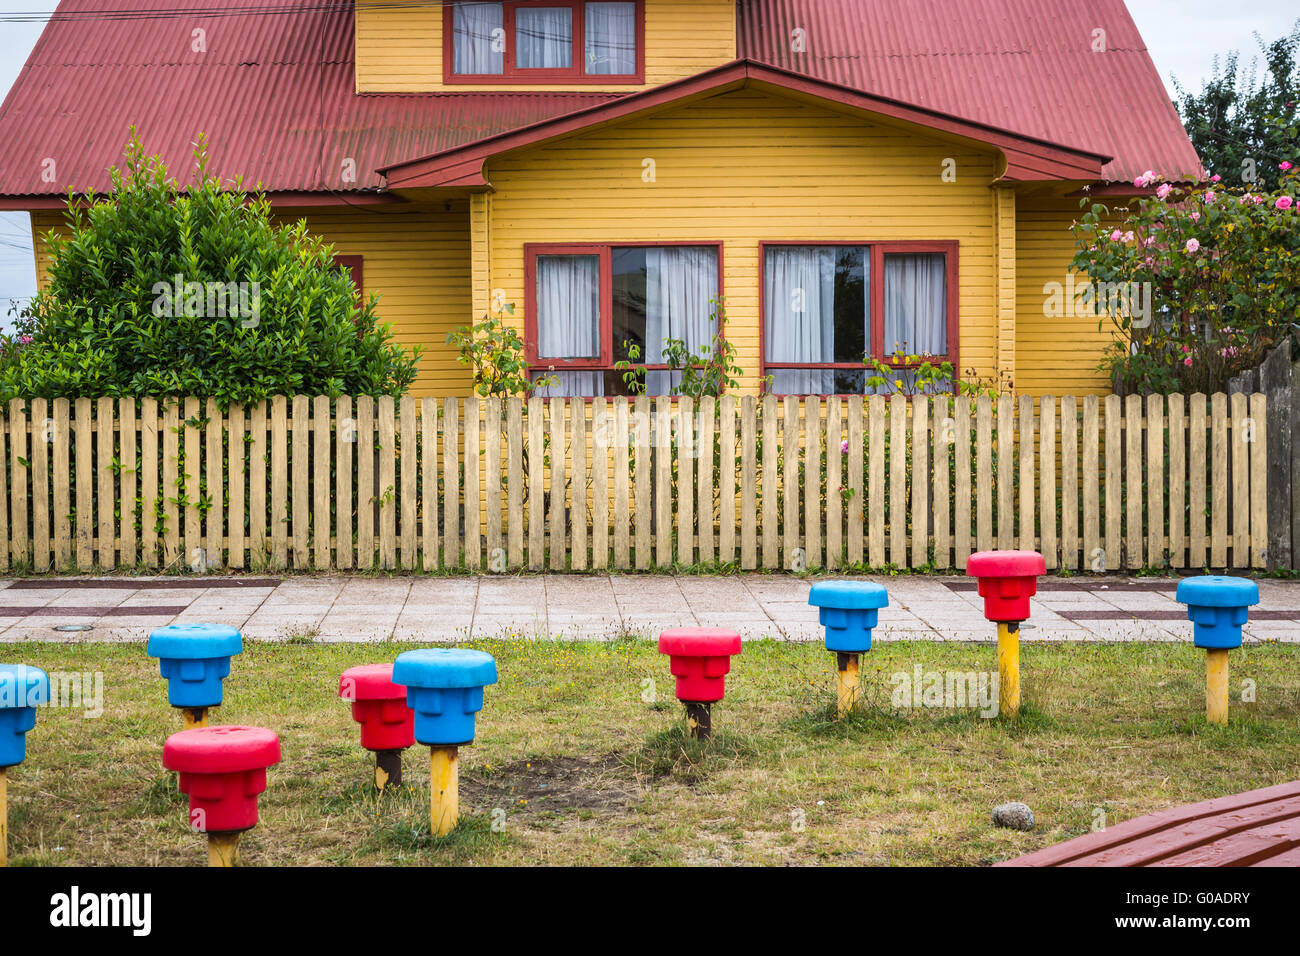 Exterior building architecture in the village of Achao, Chile, South America. Stock Photo